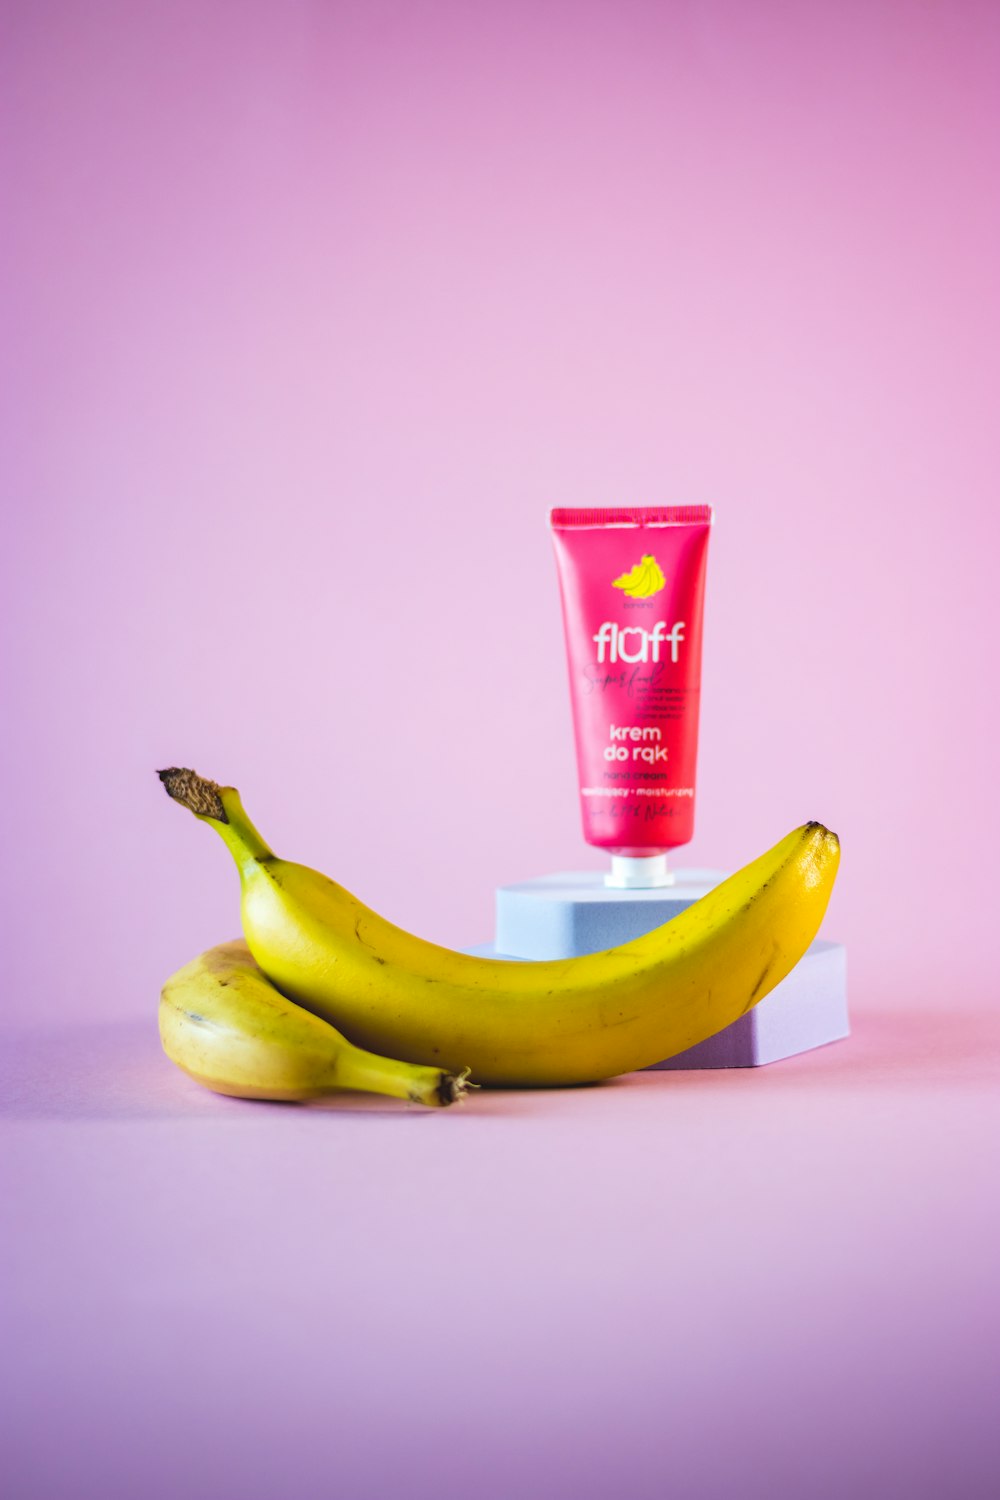 a banana and a tube of sunscreen on a pink background